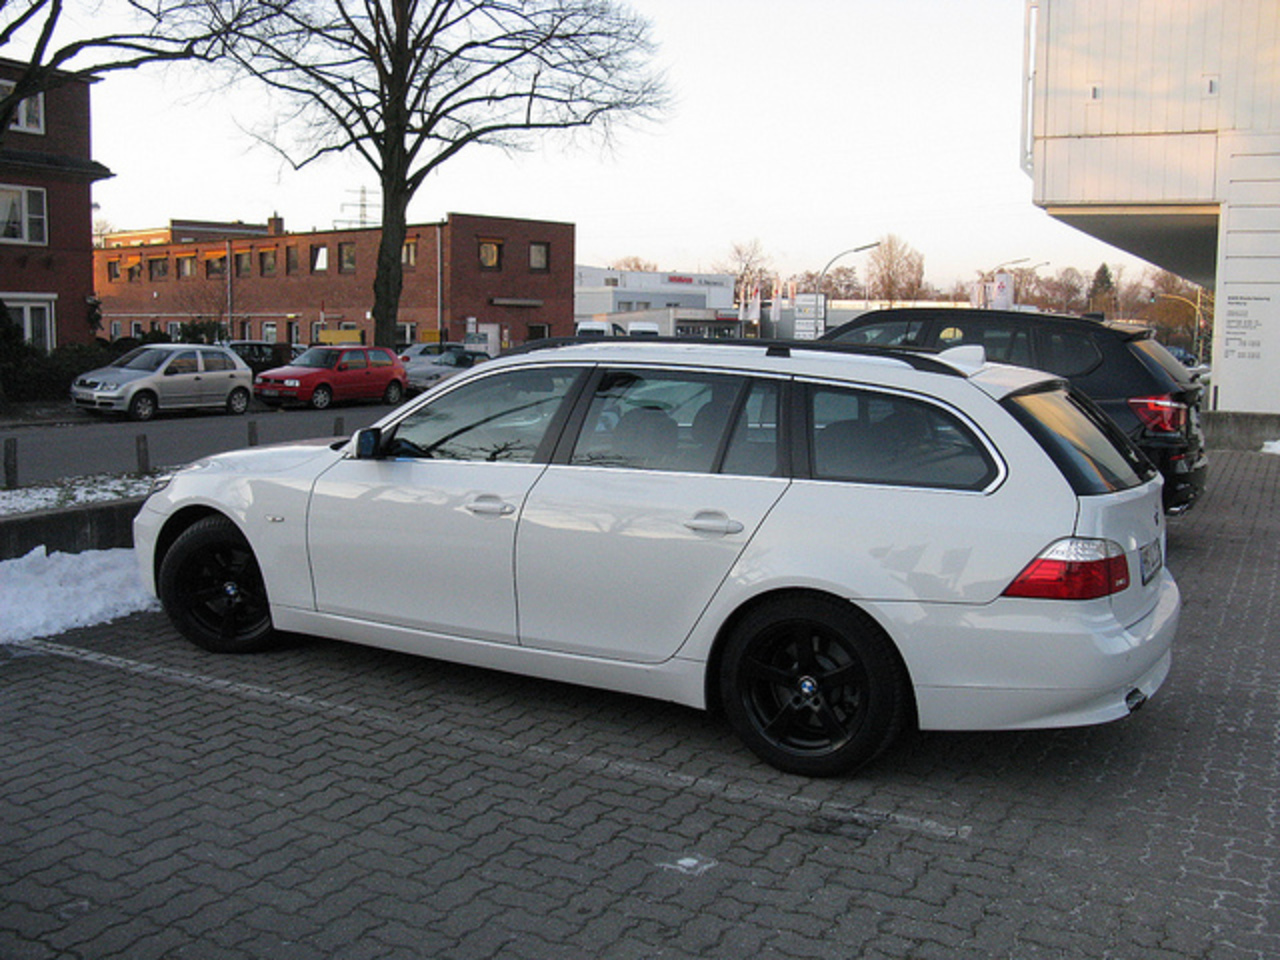 BMW 5 Series Touring E61 | Flickr - Photo Sharing!